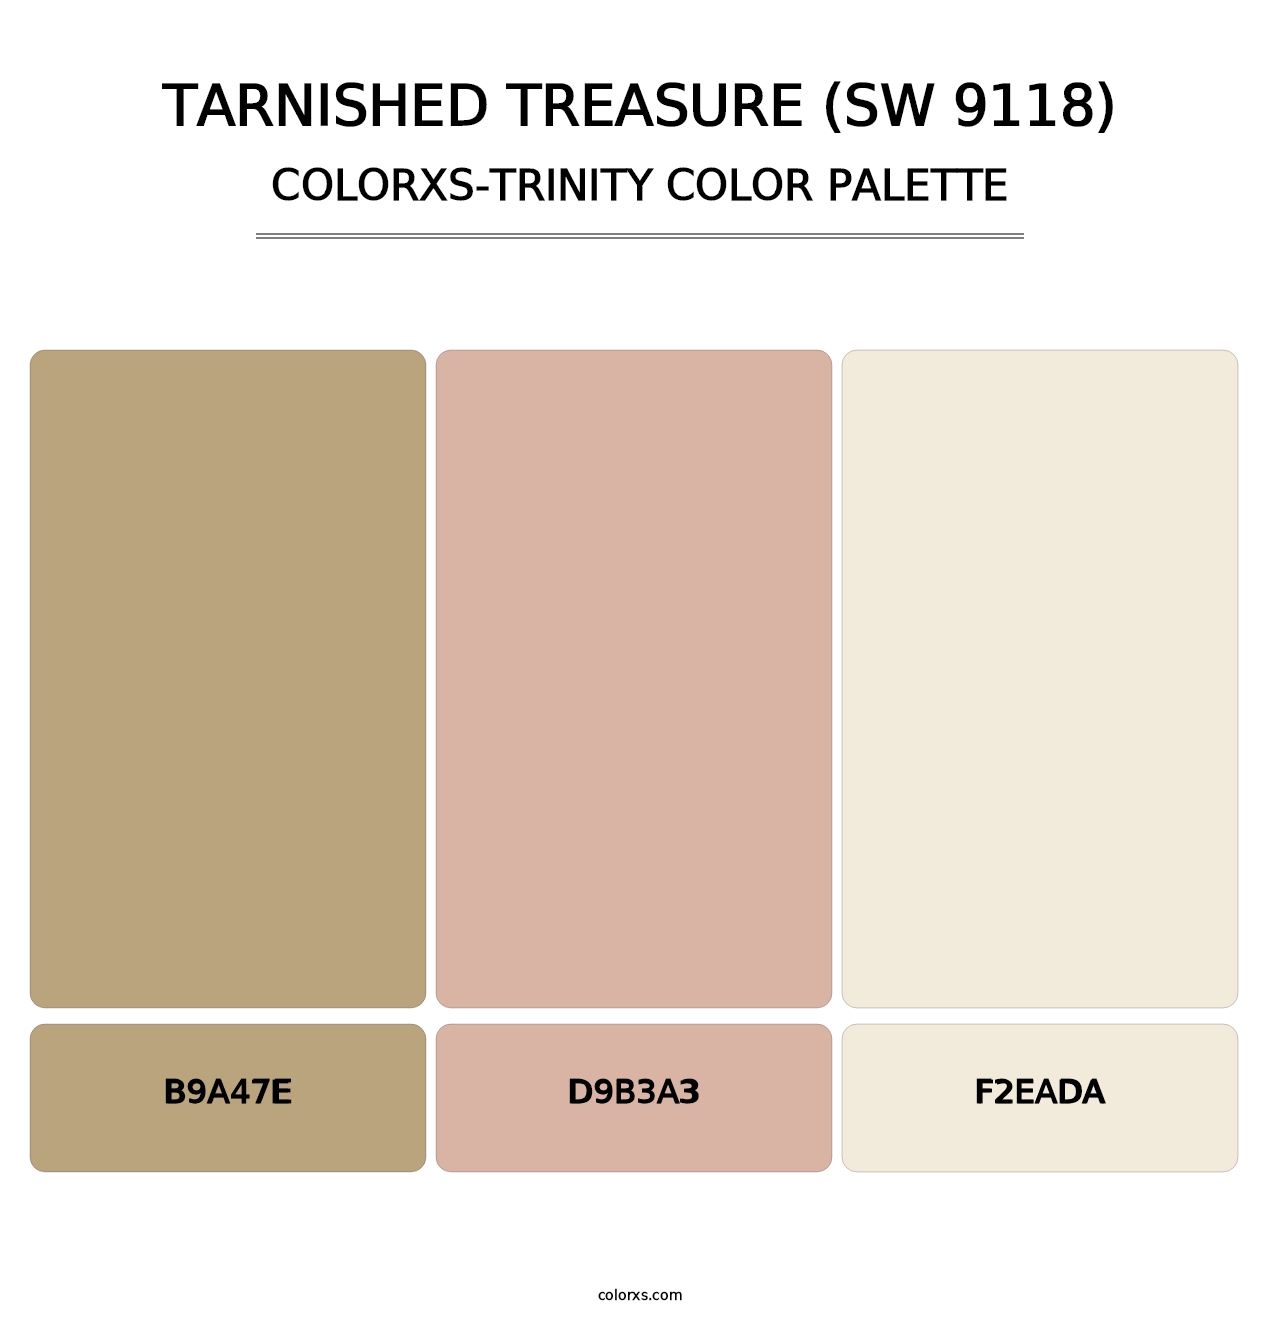 Tarnished Treasure (SW 9118) - Colorxs Trinity Palette